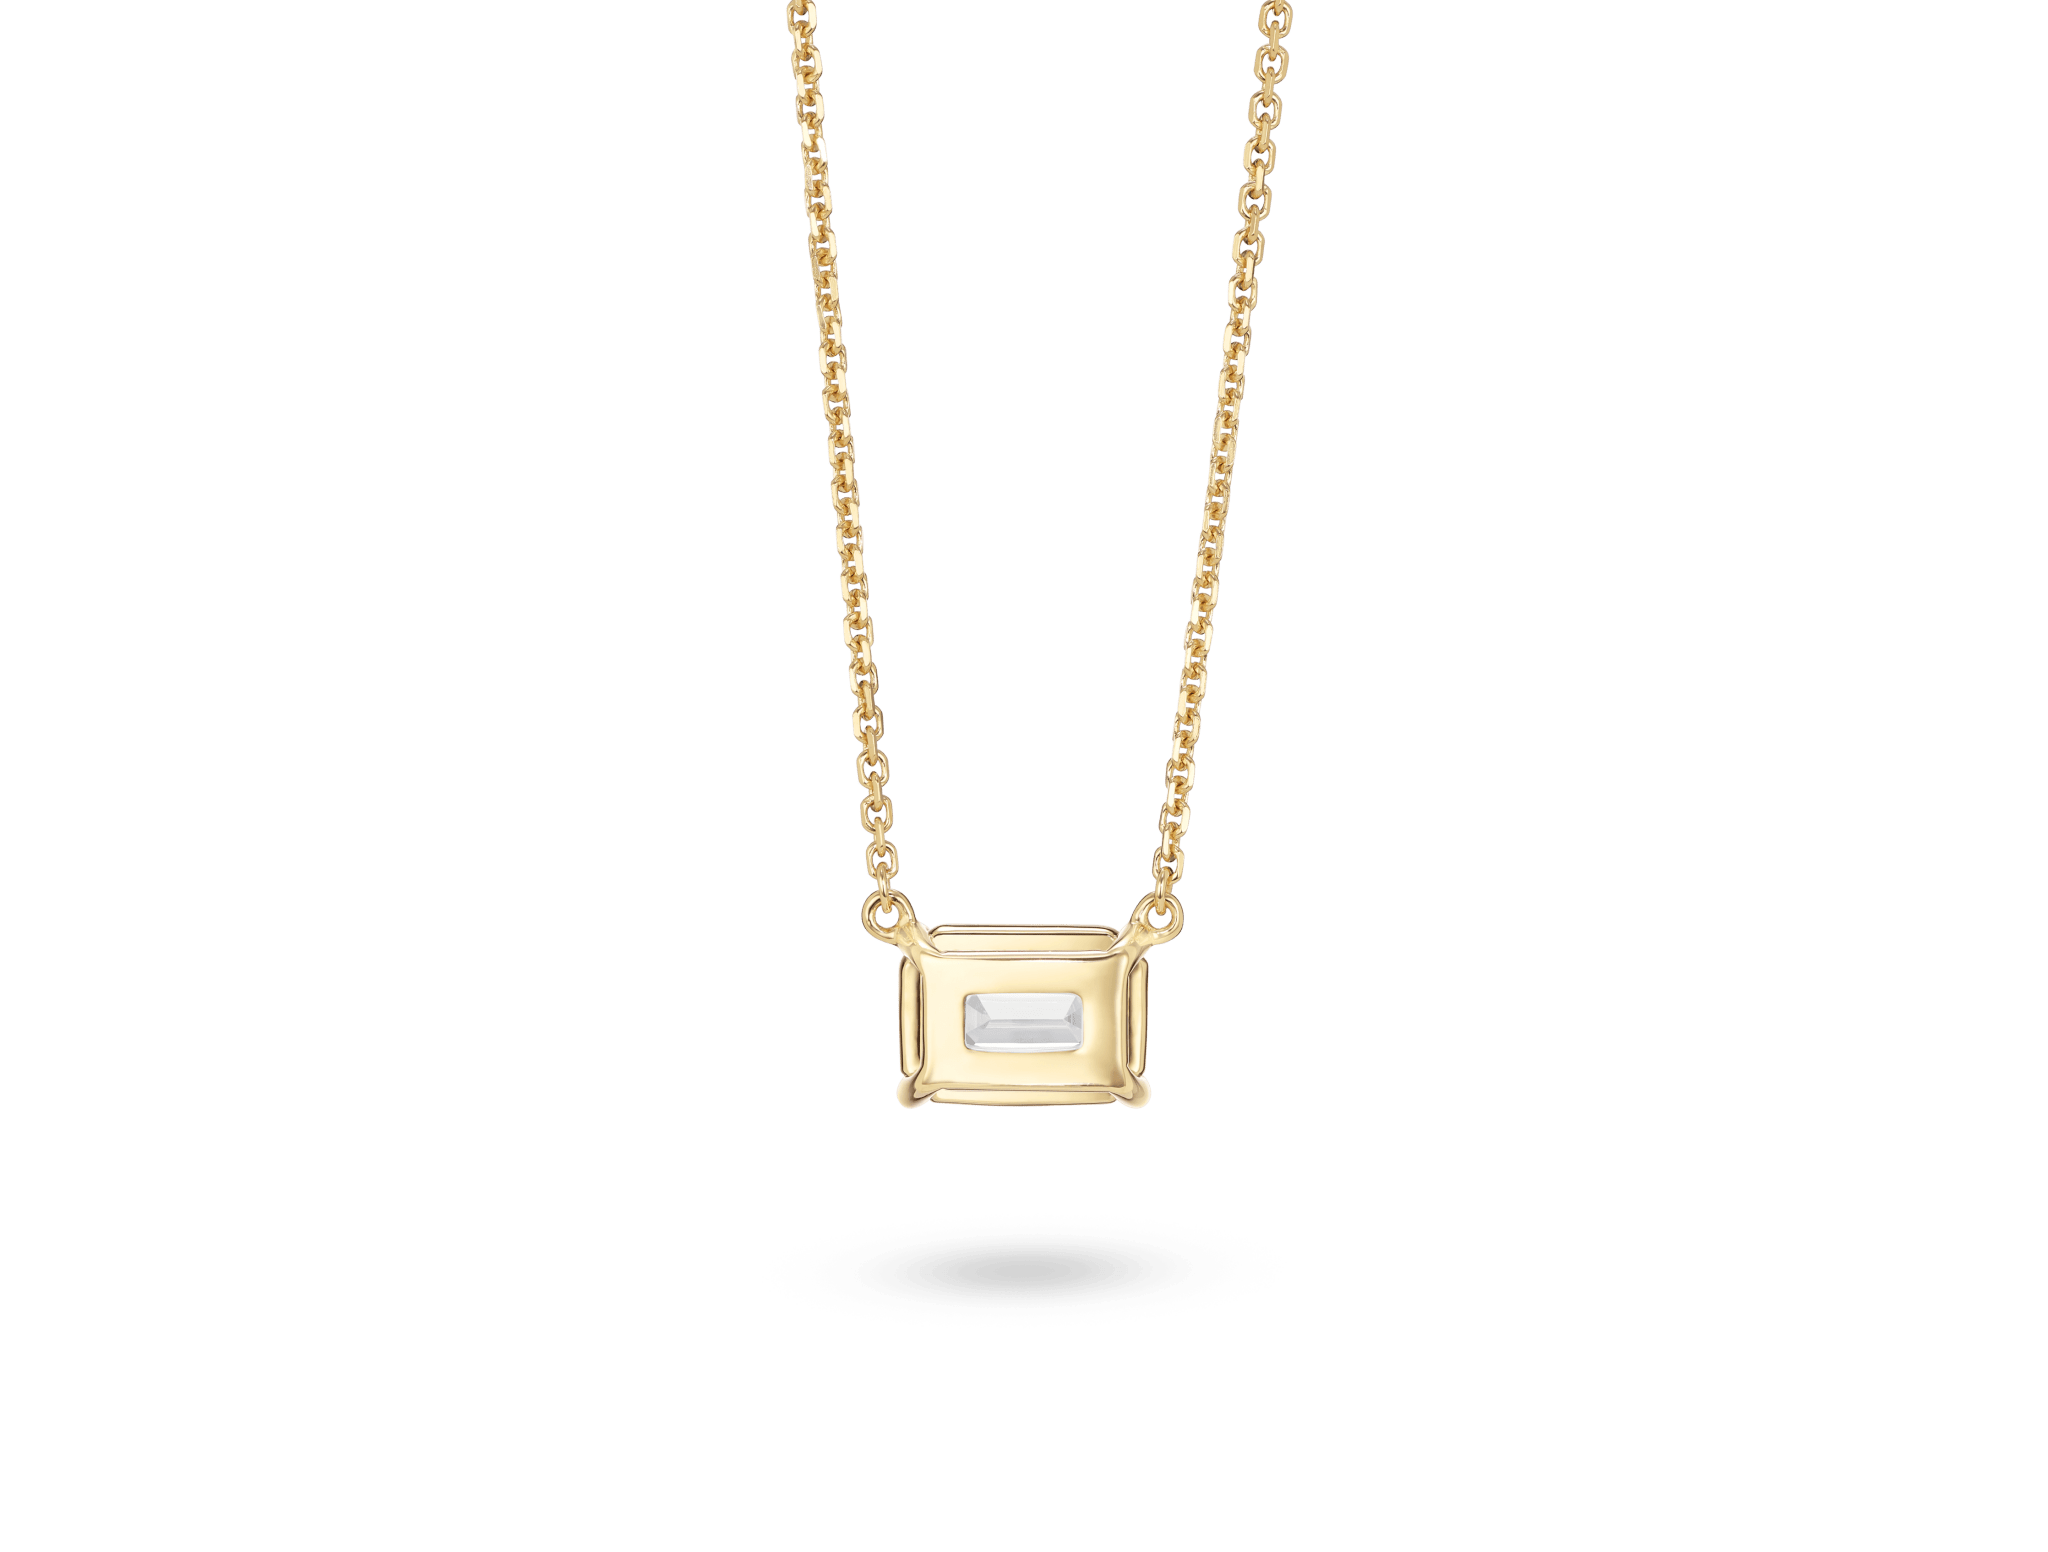 East West Emerald Cut Pendant - The Clear Cut Collection